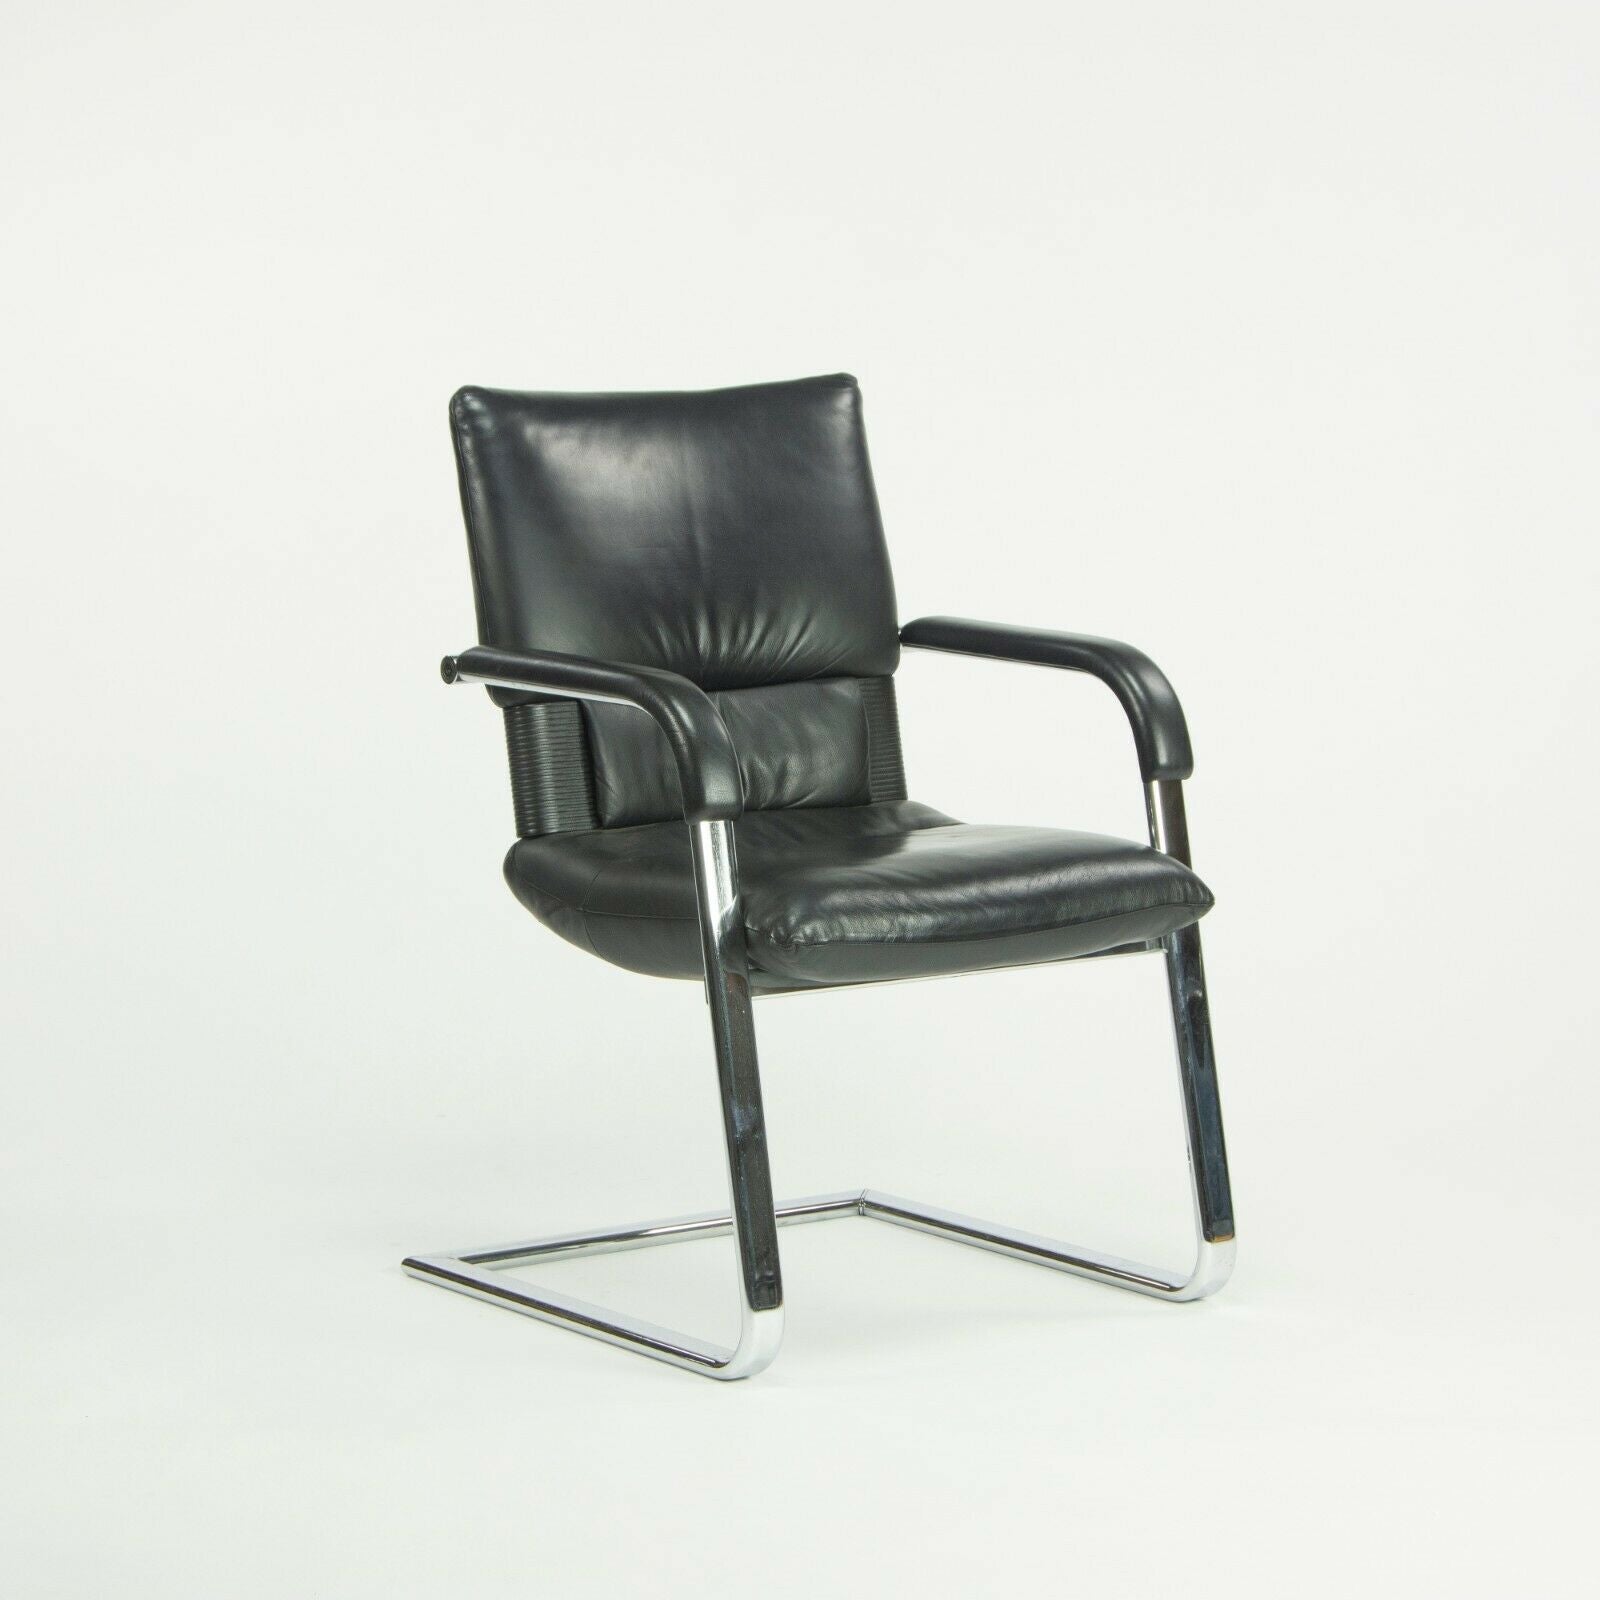 Pair of 1986 Mario Bellini for Vitra Figura Imago Arm Chairs in Black Leather